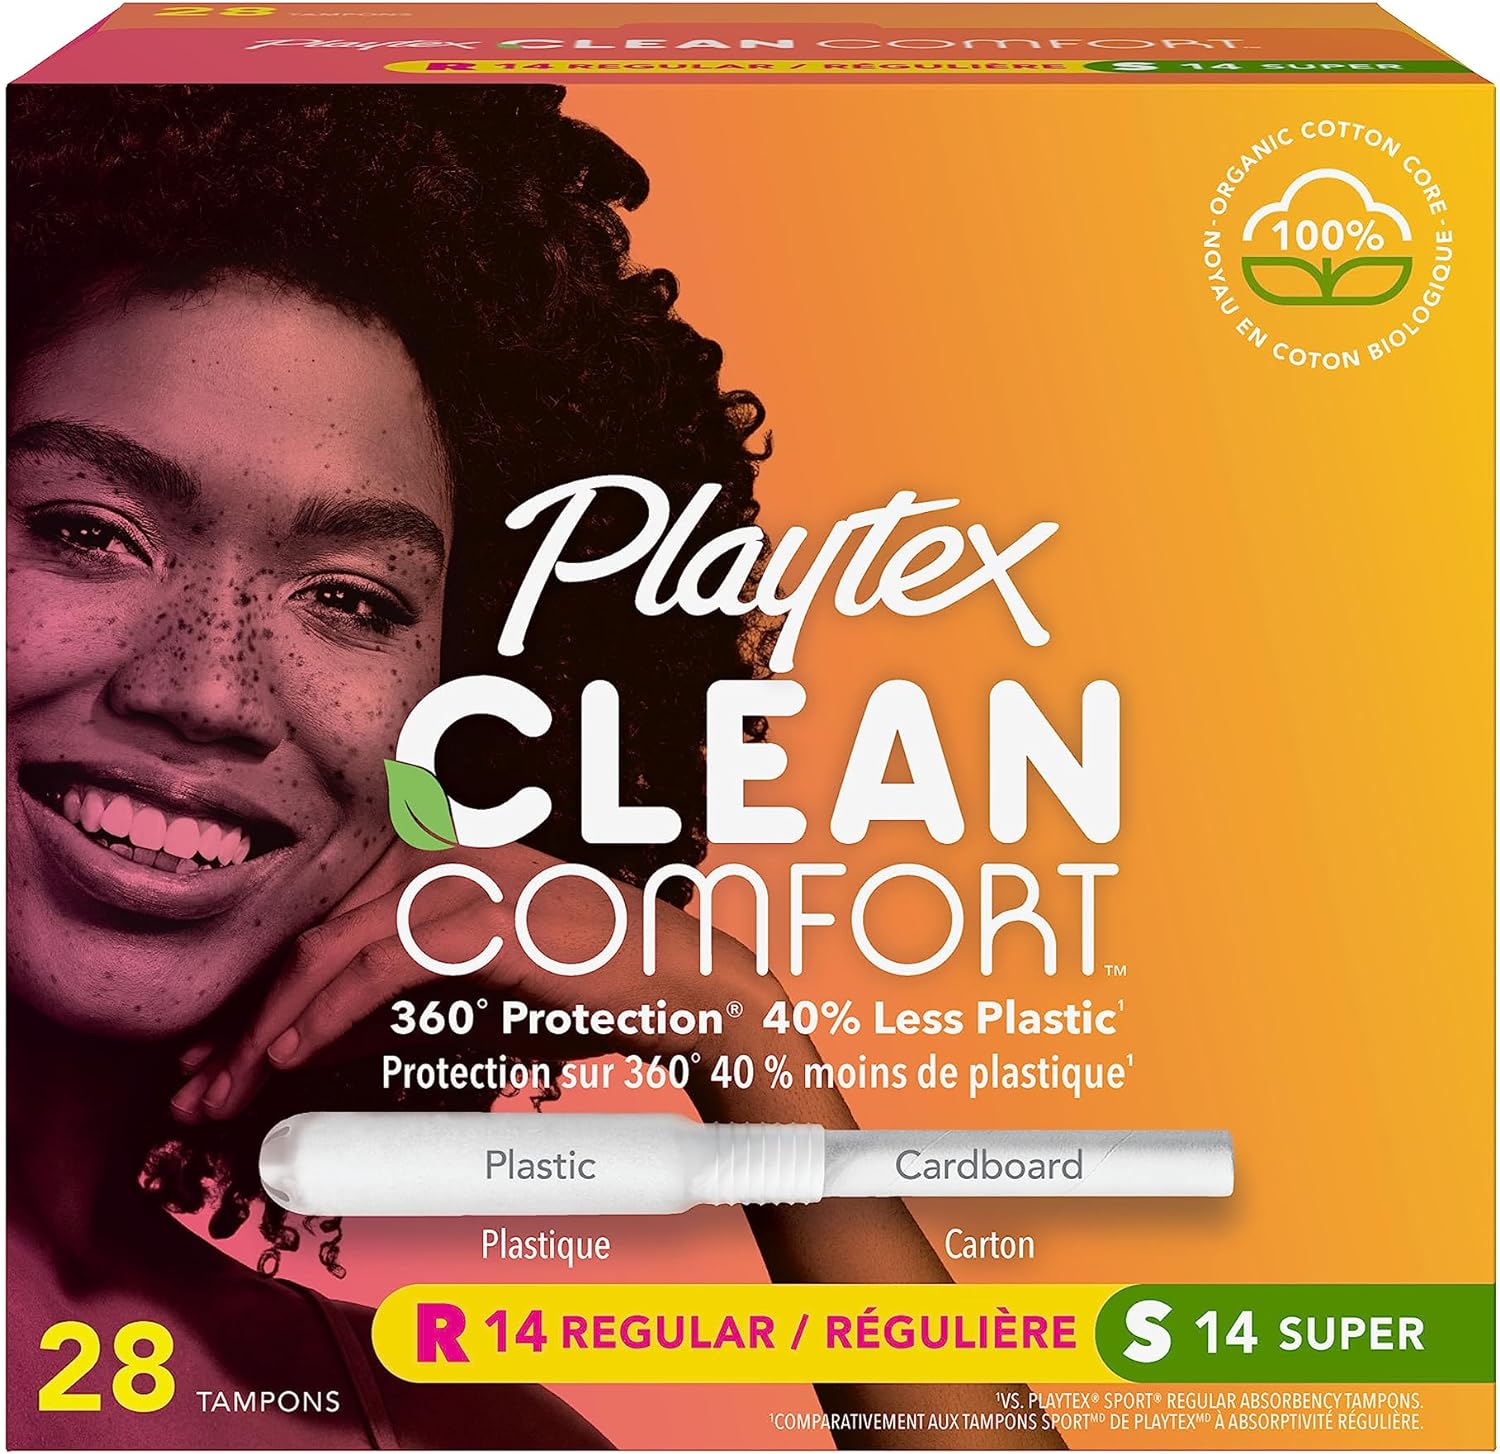 Clean Comfort Organic Cotton Tampons, Multipack (14ct Regular/14ct Super Absorbency), Fragrance-Free, Organic Cotton - 28ct